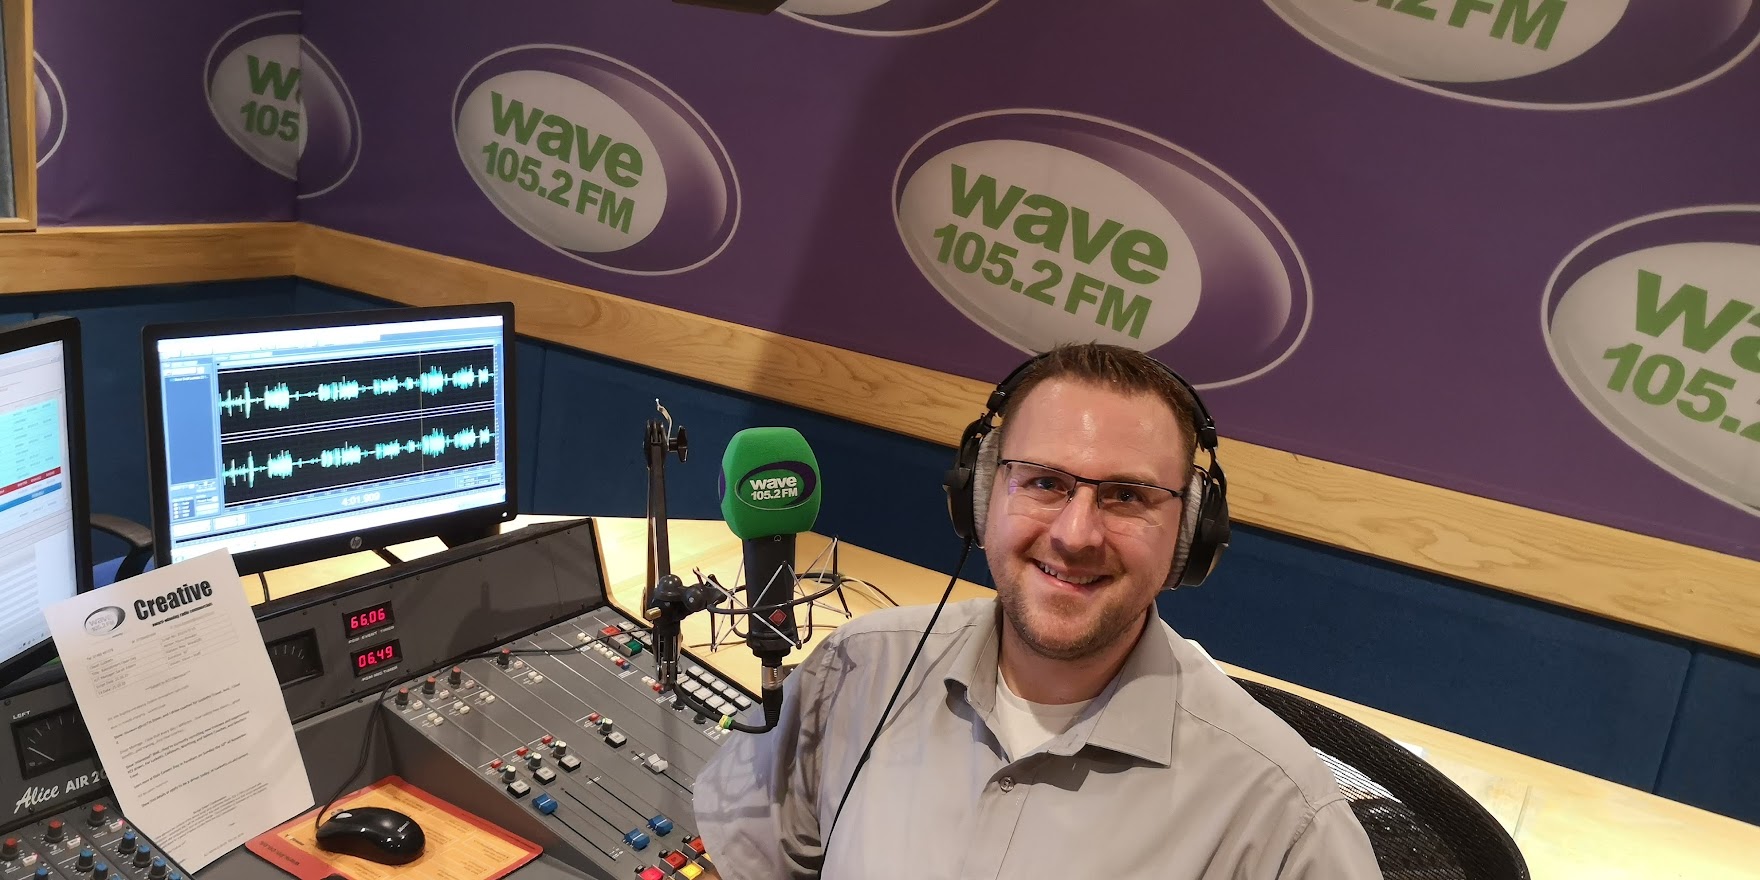 Steve Small, Voice Actor, Voice over artist, recording voiceover at radio station, wave 105, regional radio station voice over